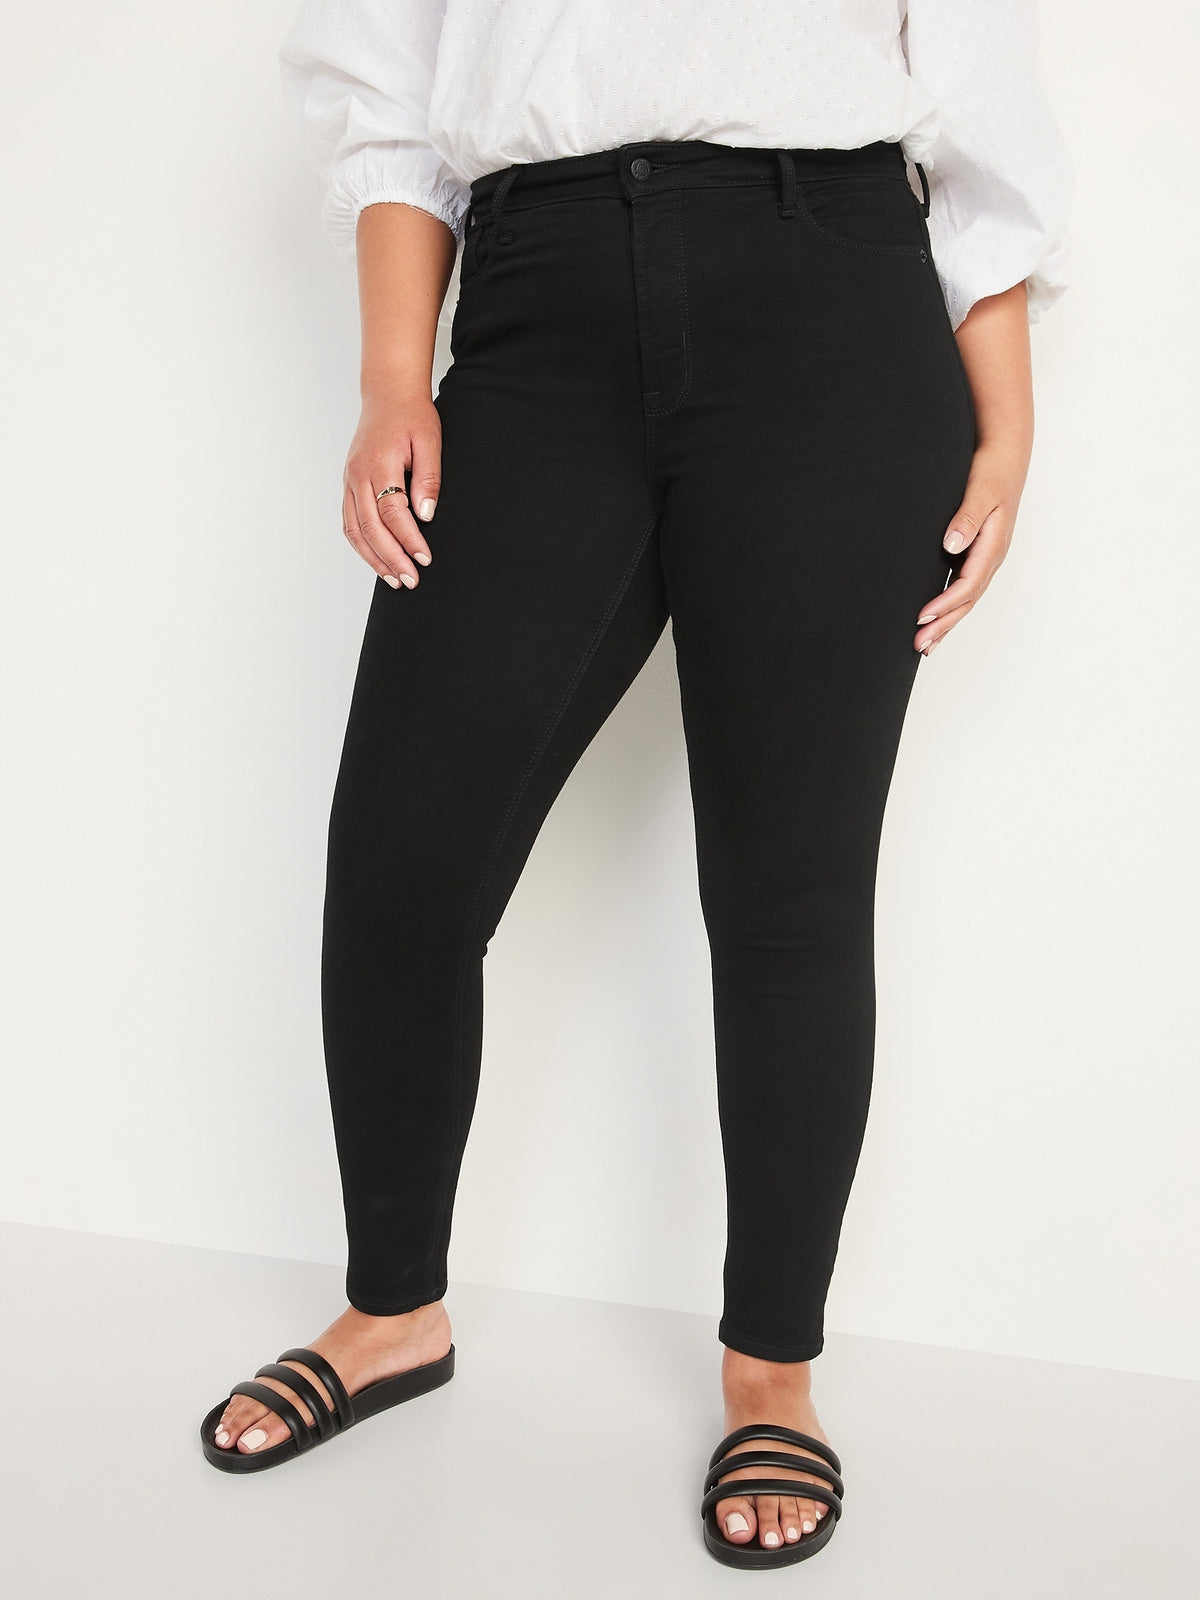 High-Waisted Rockstar Super-Skinny Jeans For Women - Old Navy Philippines